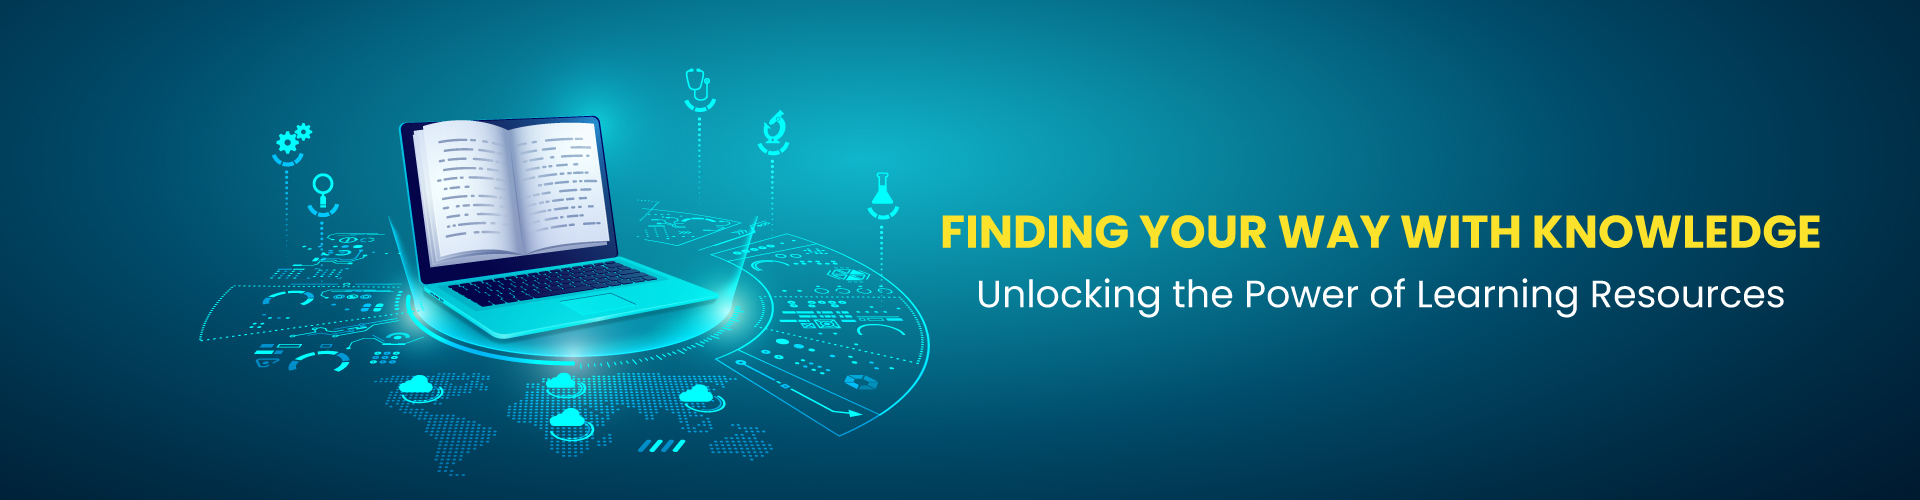 Finding Your Way with Knowledge: Unlocking the Power of Learning Resources